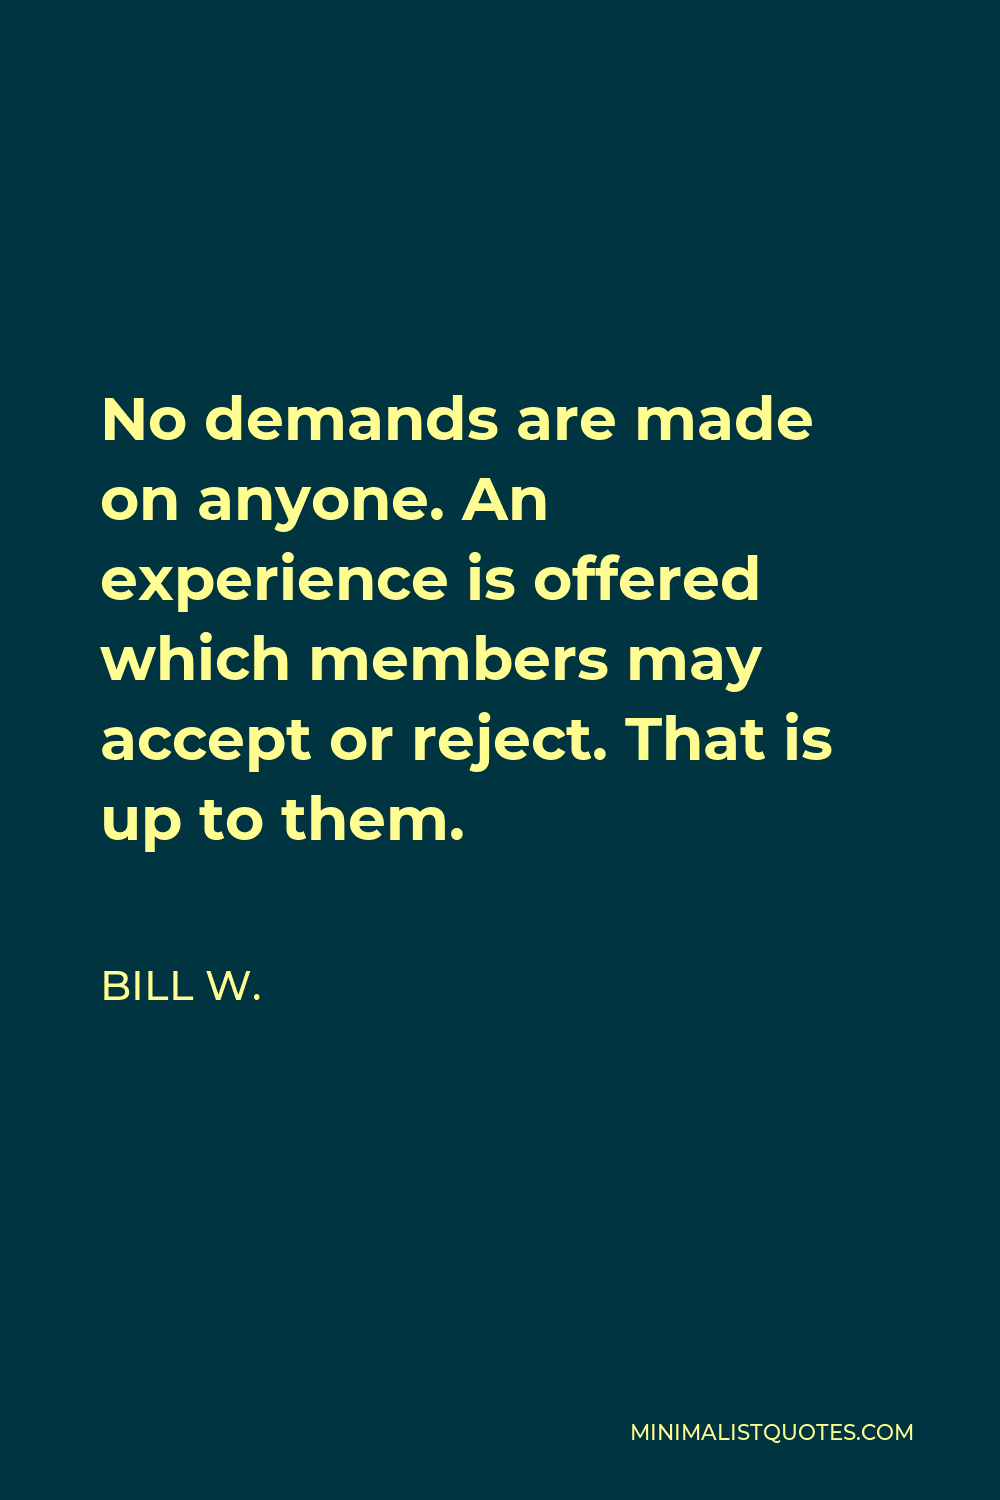 Bill W. Quote - No demands are made on anyone. An experience is offered which members may accept or reject. That is up to them.